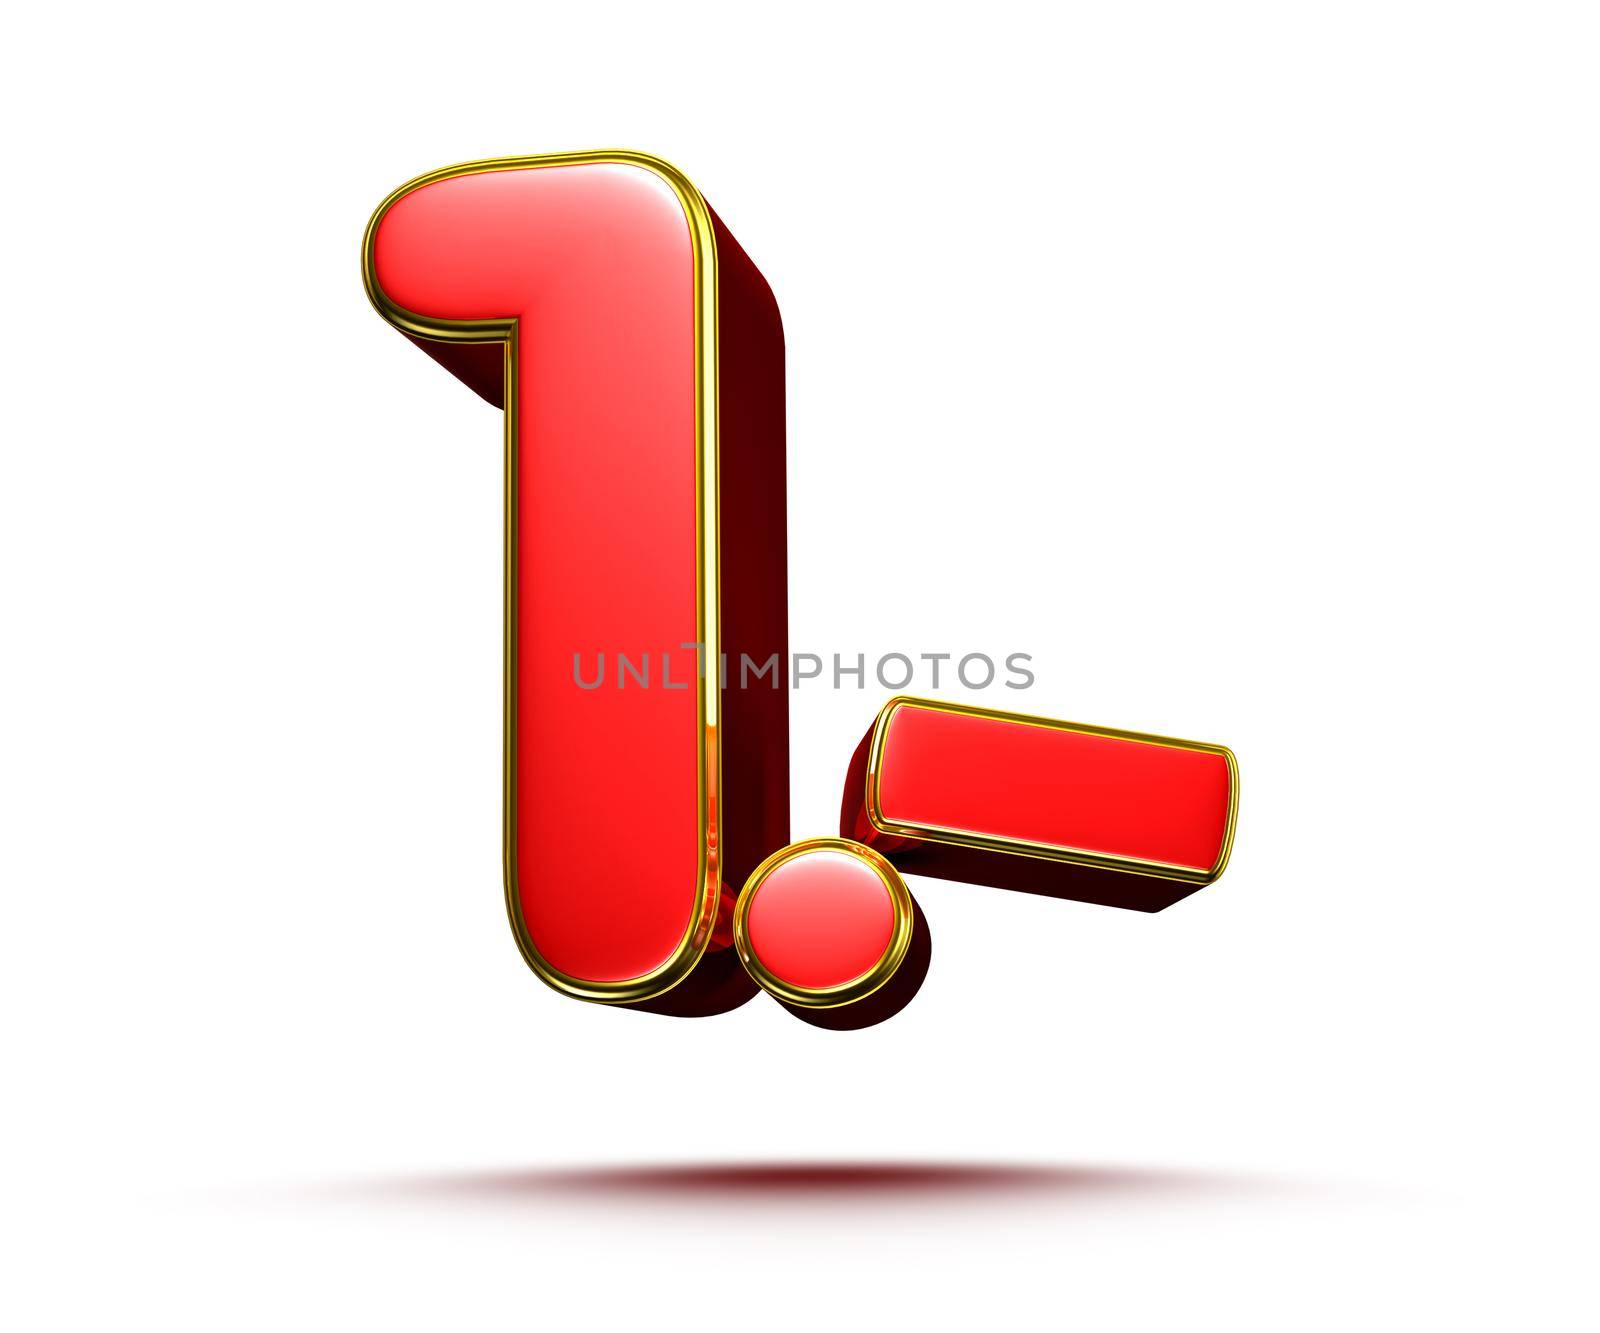 Price tag number 1 red 3D illustration with gold border on a white background with clipping path.